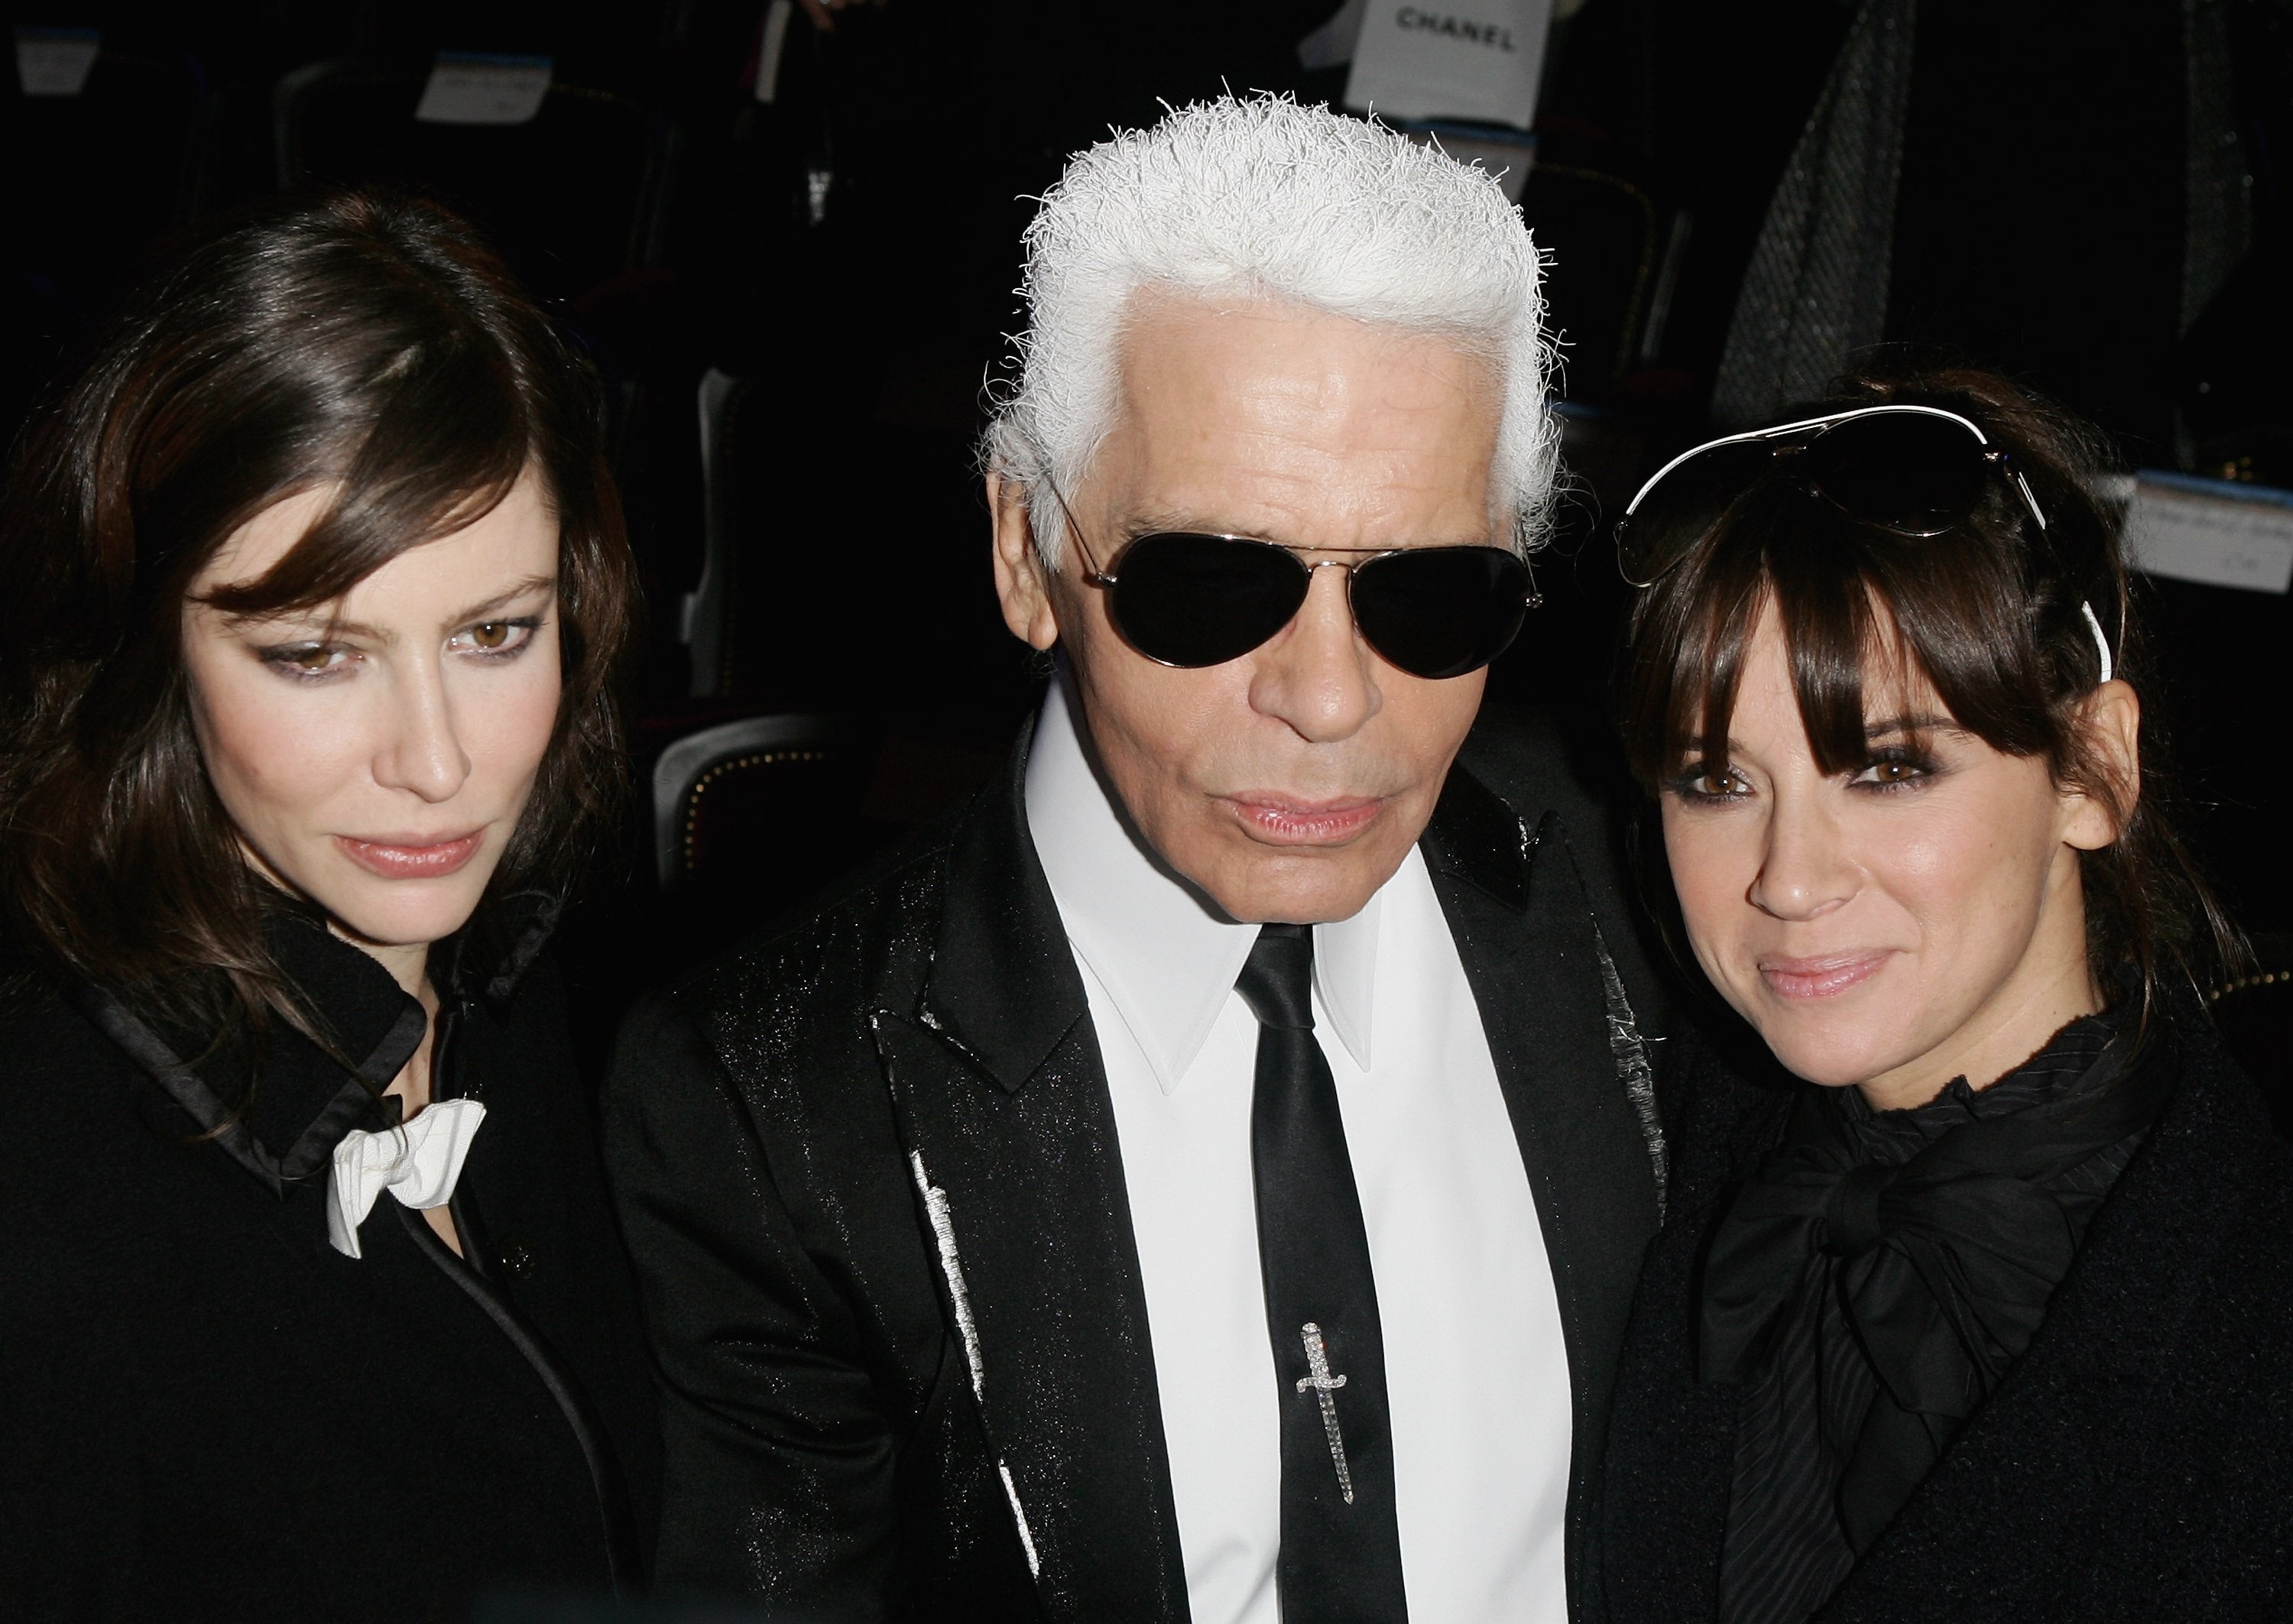 Cat Power (right) with Karl Lagerfeld and Anna Mouglalis at the Chanel Paris Monte Carlo fashion show, December 2006